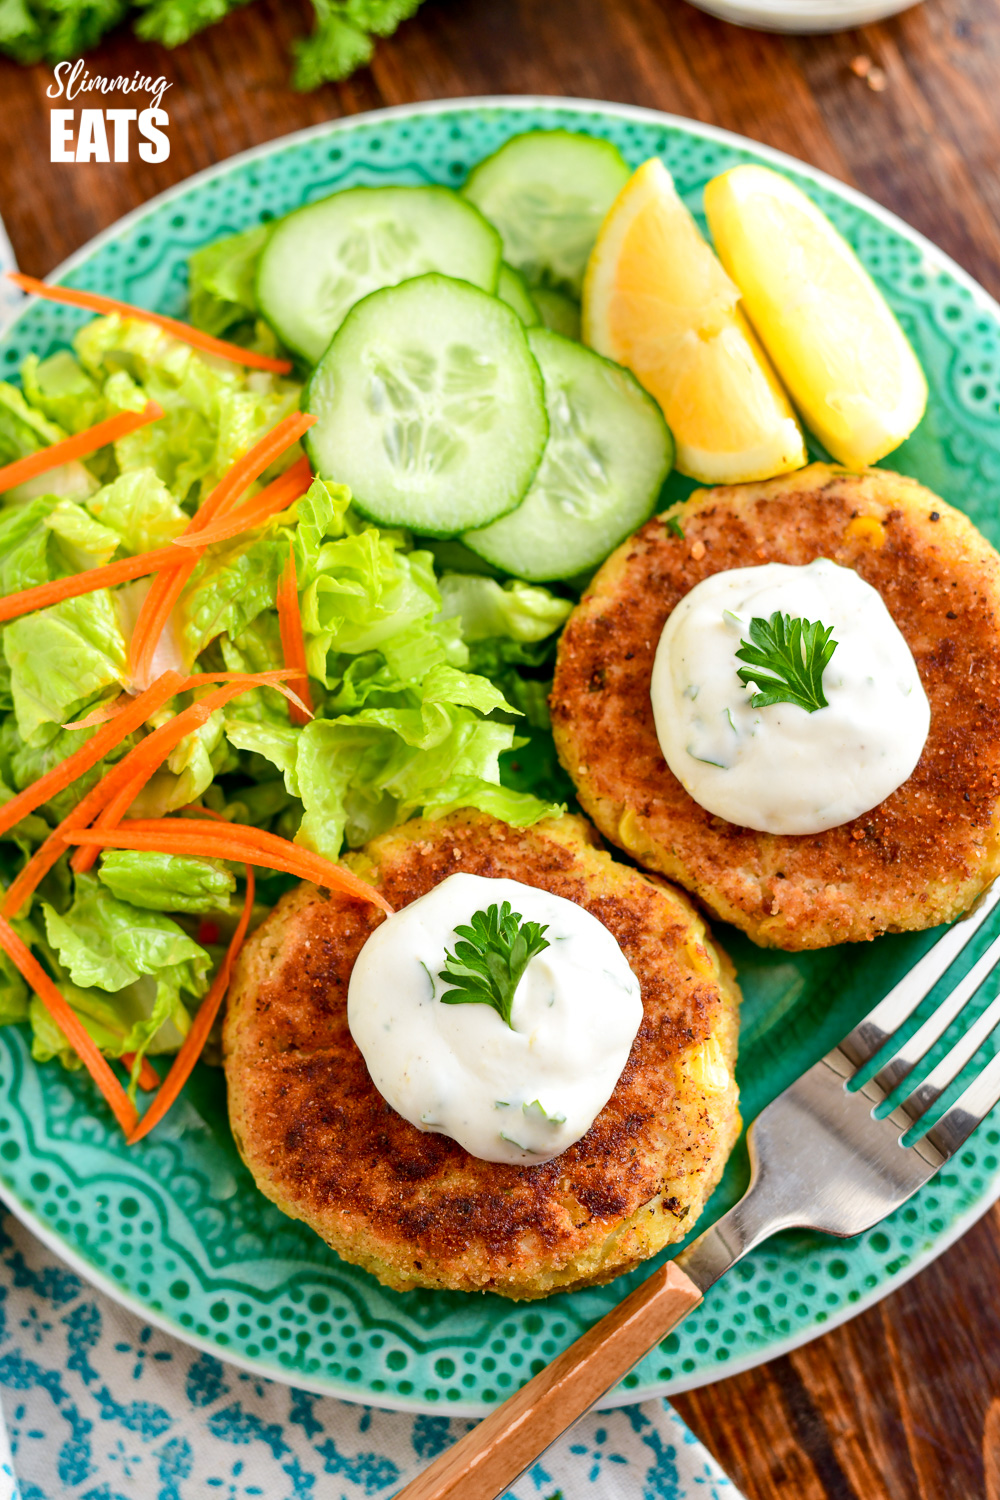 over the top view of crab cakes on a green plate with side salad